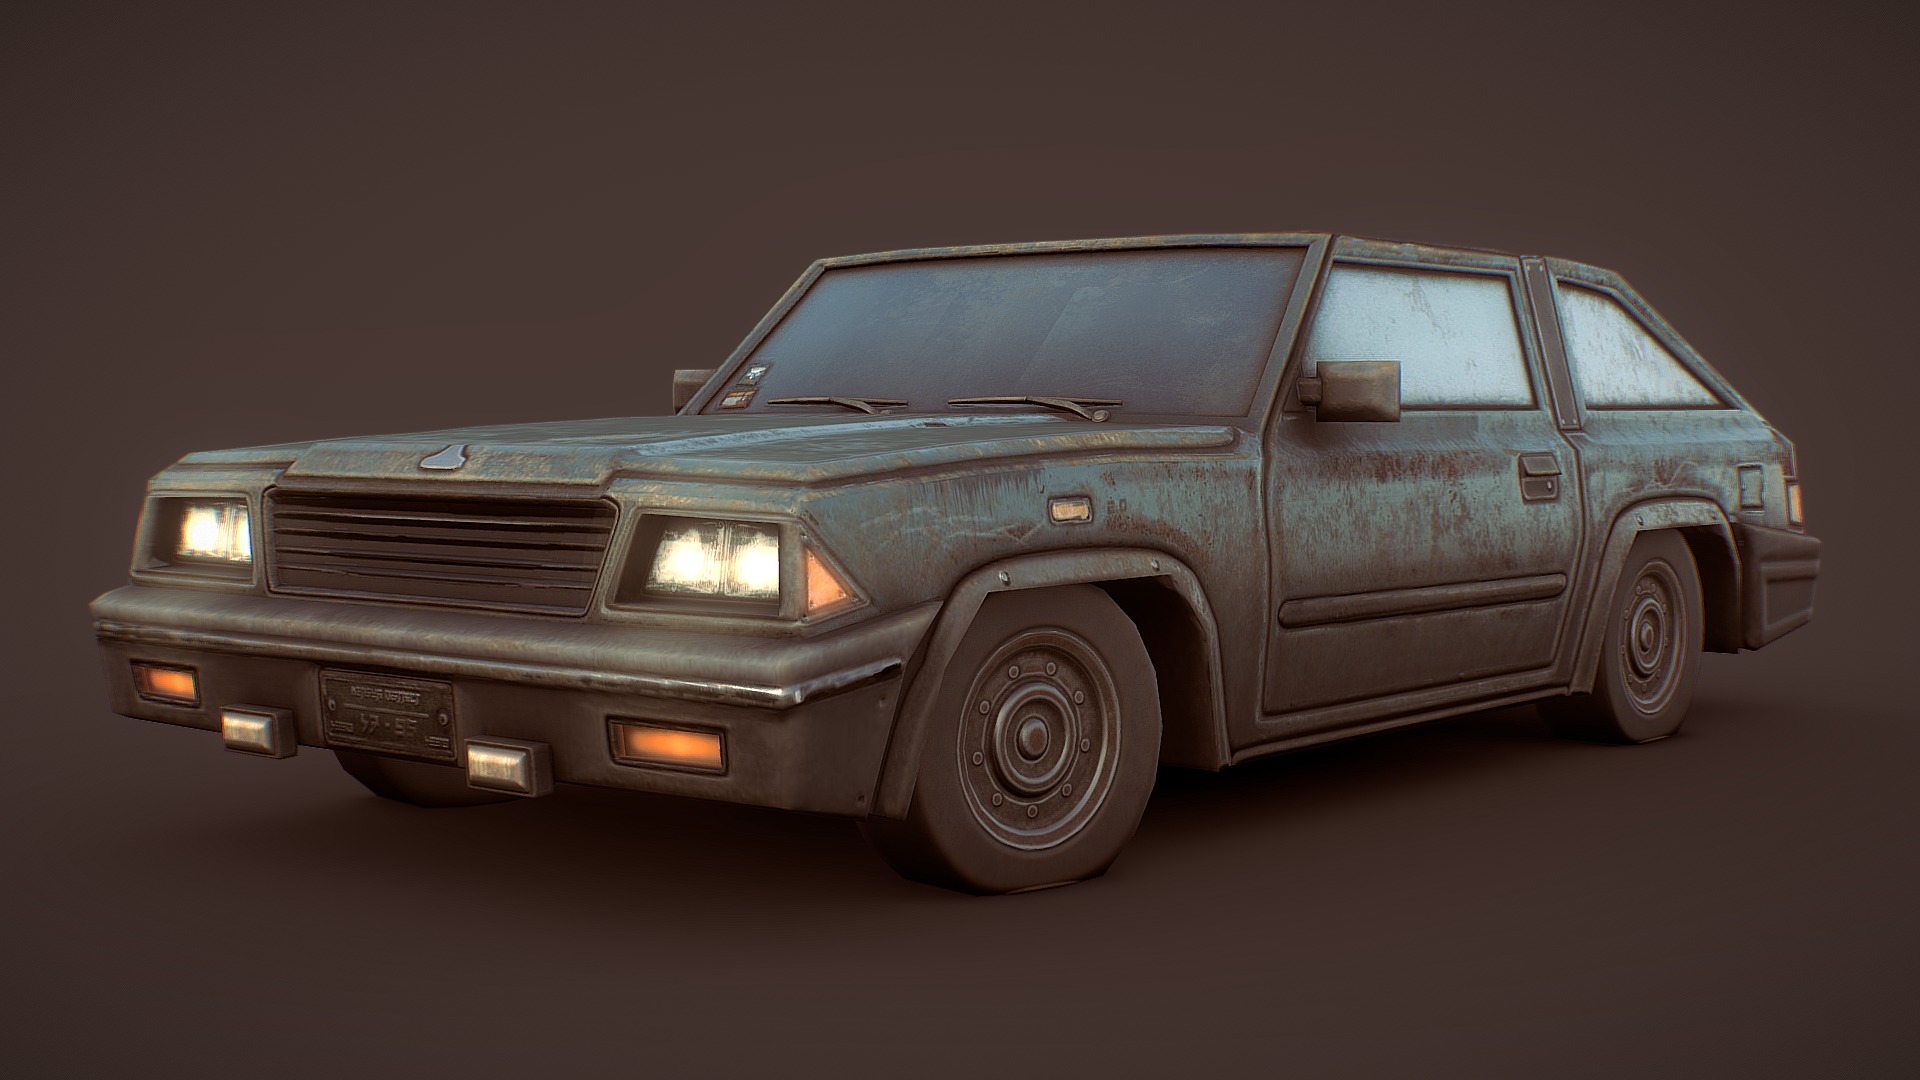 3D model Boxy Hatchback - This is a 3D model of the Boxy Hatchback. The 3D model is about a car parked on a road.